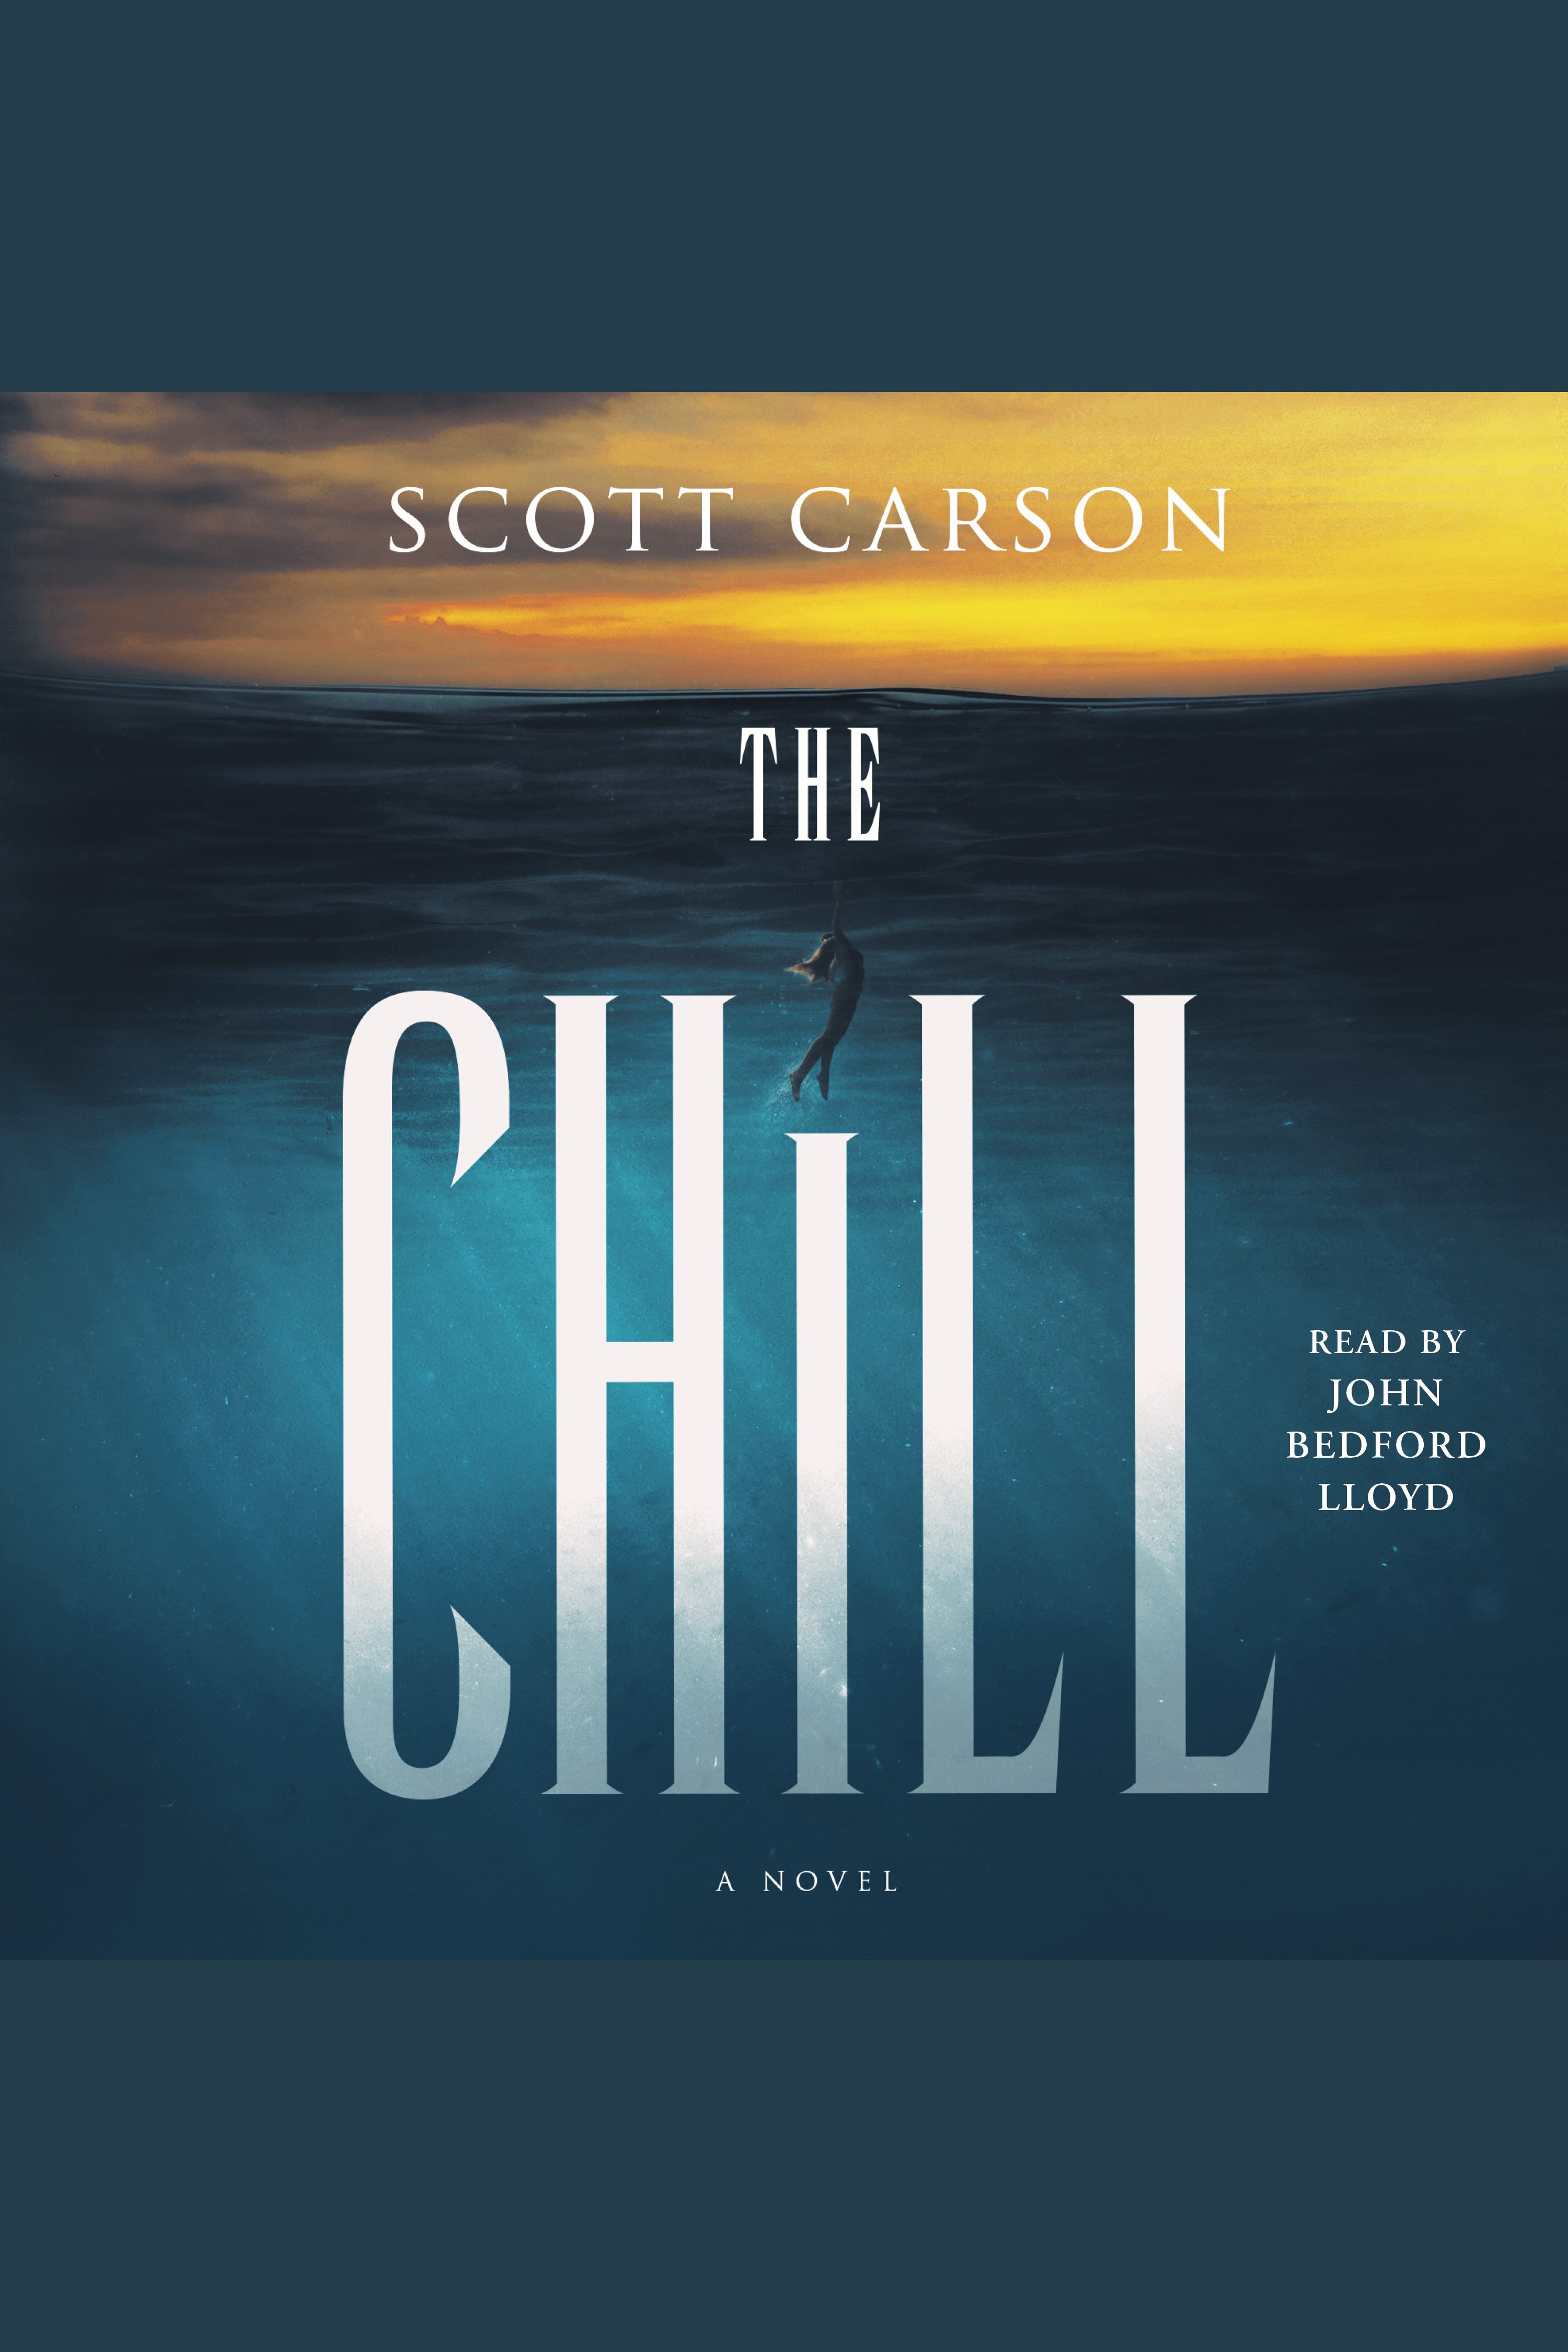 The Chill cover image